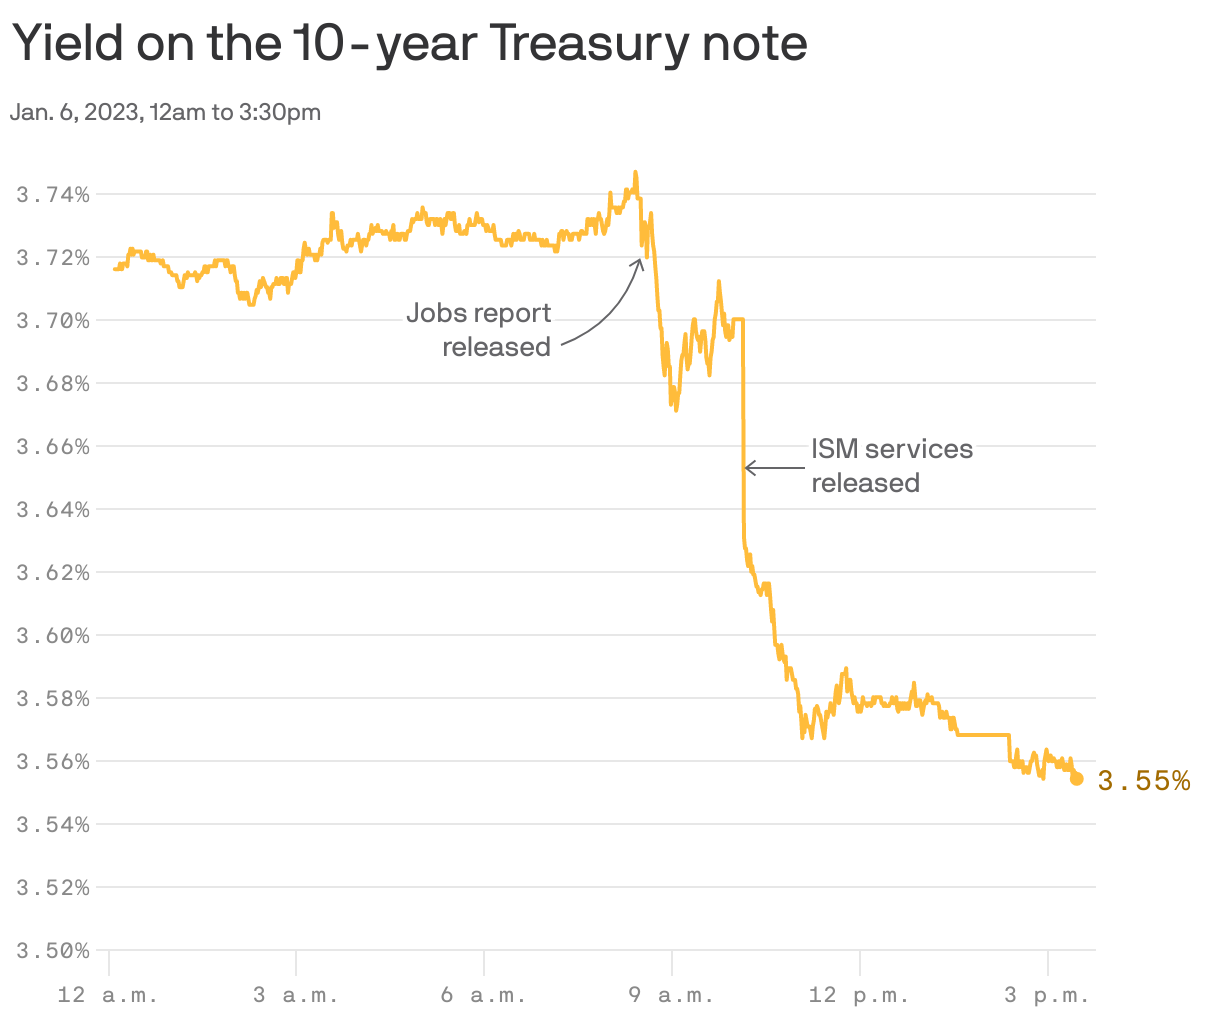 Yield on the 10-year Treasury note